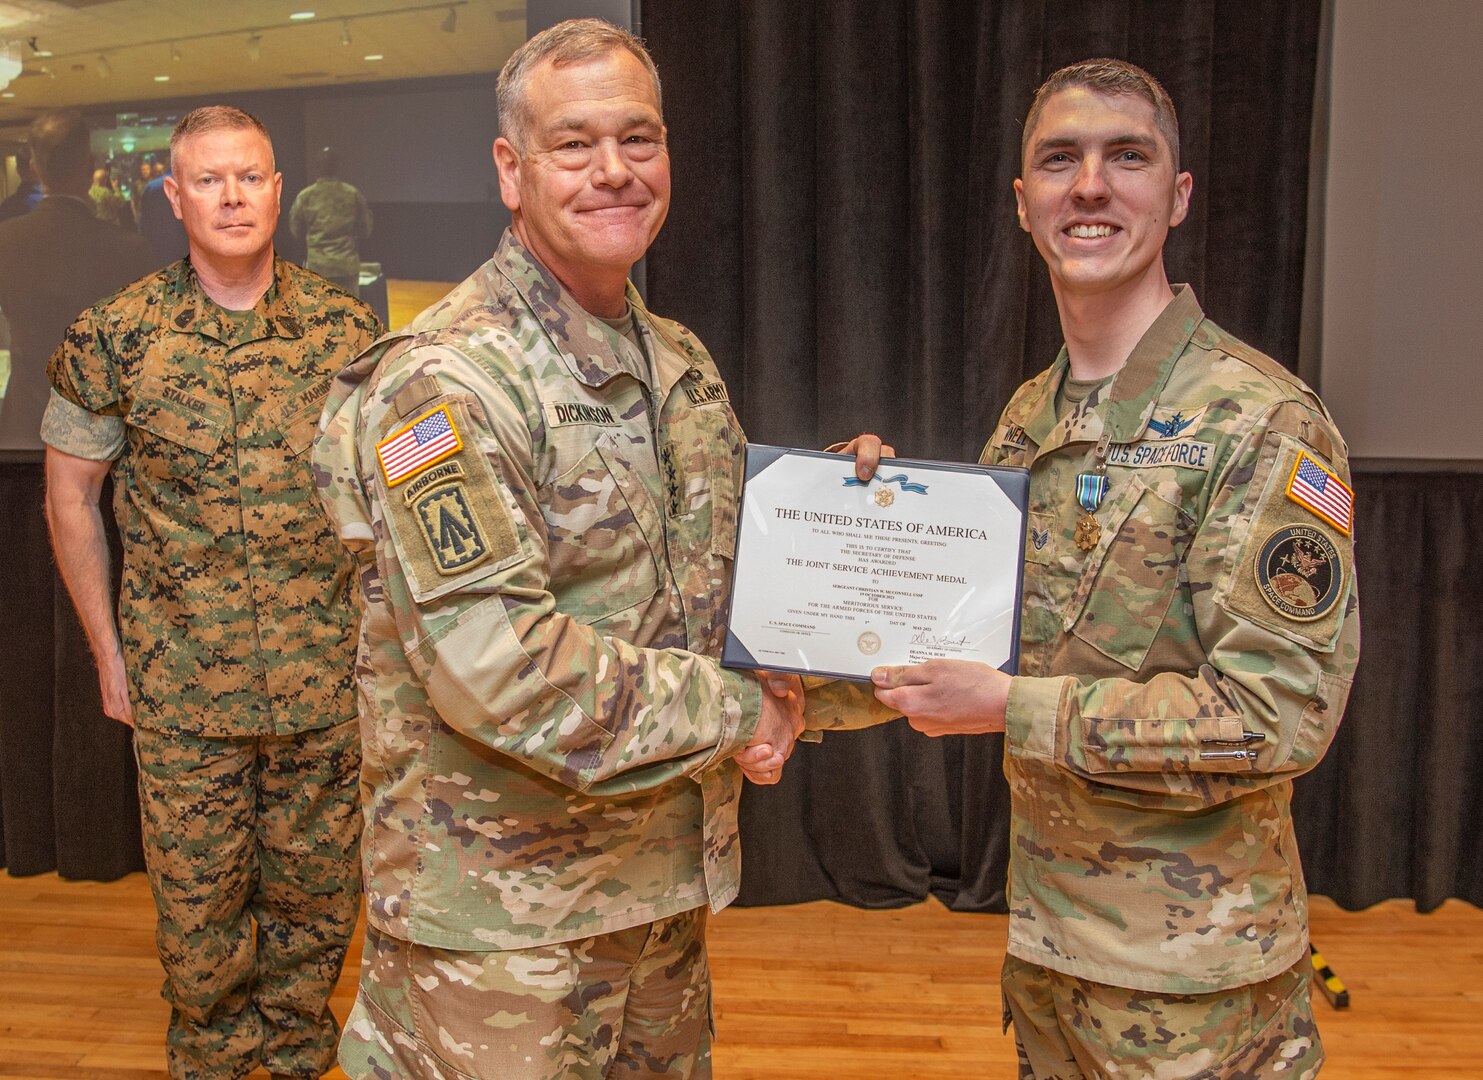 U.S. Army Gen. James Dickinson, U.S. Space Command commander, middle, presents U.S. Space Force Sgt. Christian McConnell, a Missile Warning Center crew technician for the Combined Force Space Component Command, right, a Joint Service Achievement Medal May 4, 2022, during a ceremony at Peterson Space Force Base, Colo.  McConnell received the medal for his quick thinking and efforts to provide emergency medical assistance to a fellow crewmember who suffered a sudden cardiac arrest at on Oct. 19, 2021. (U.S. Space Force photo by Petty Officer 1st Class John Wagner)